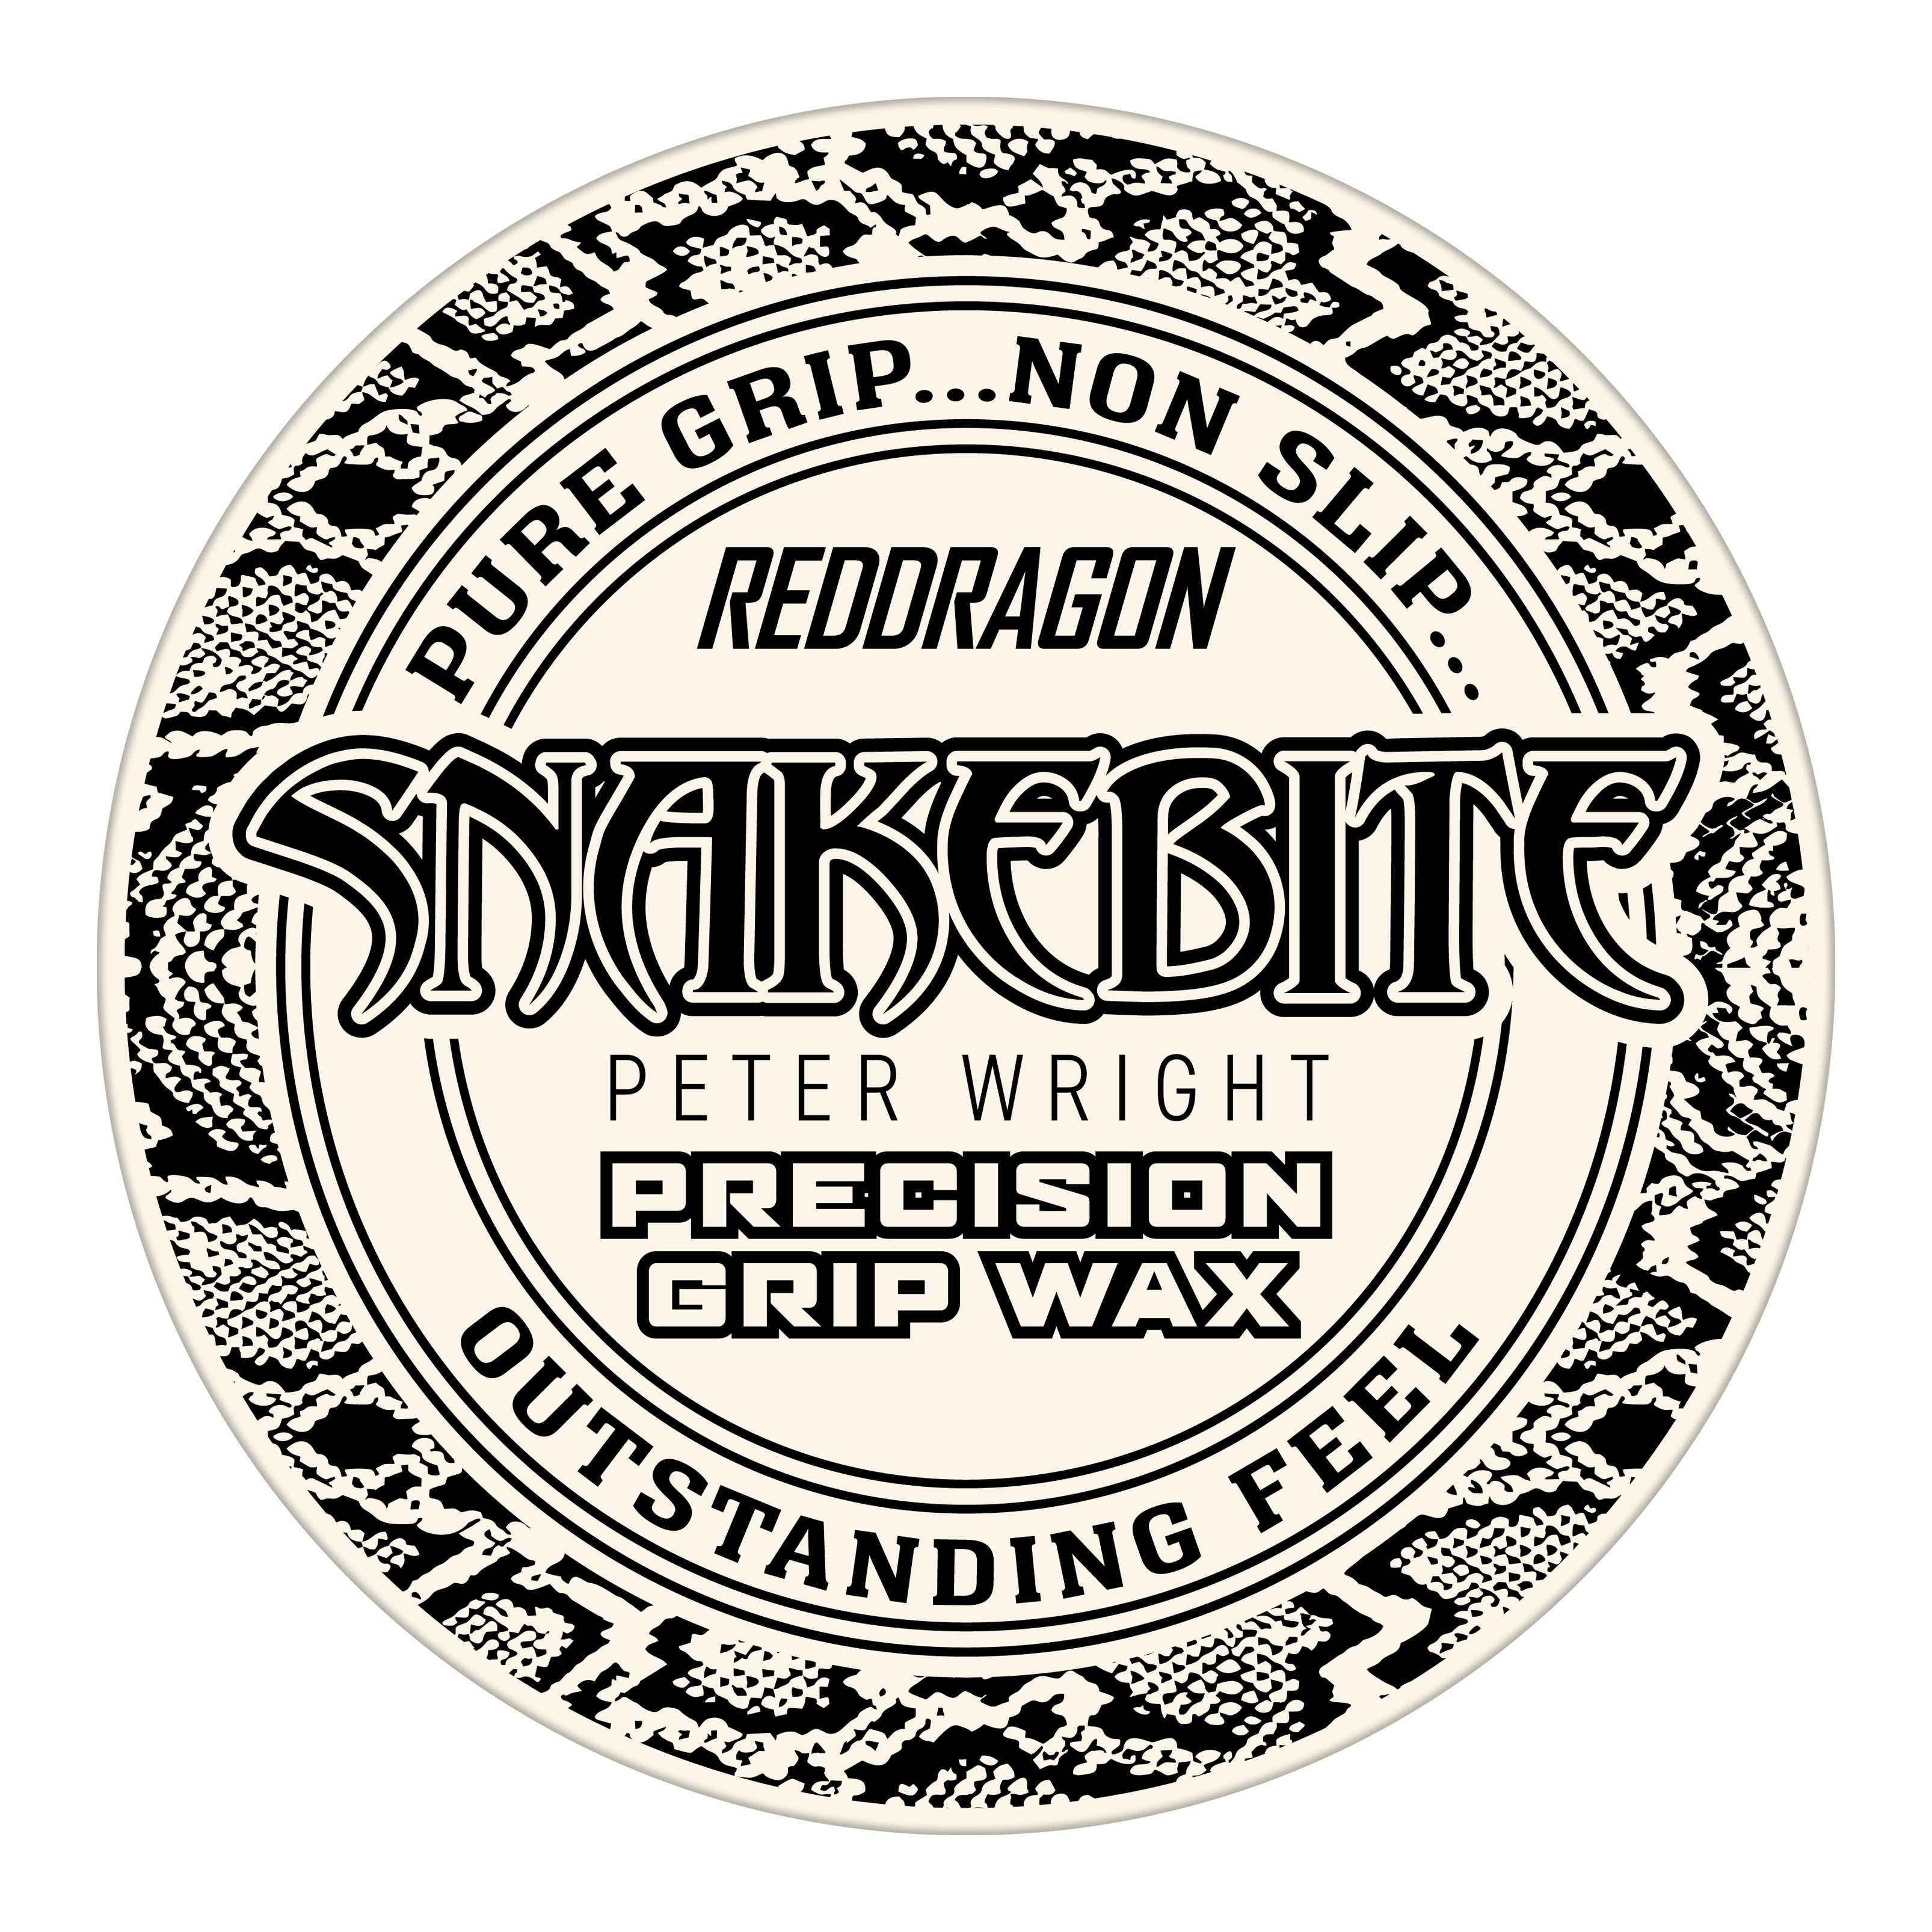 Red Dragon Peter Wright Snakebite Precision Grip Wax finger wax